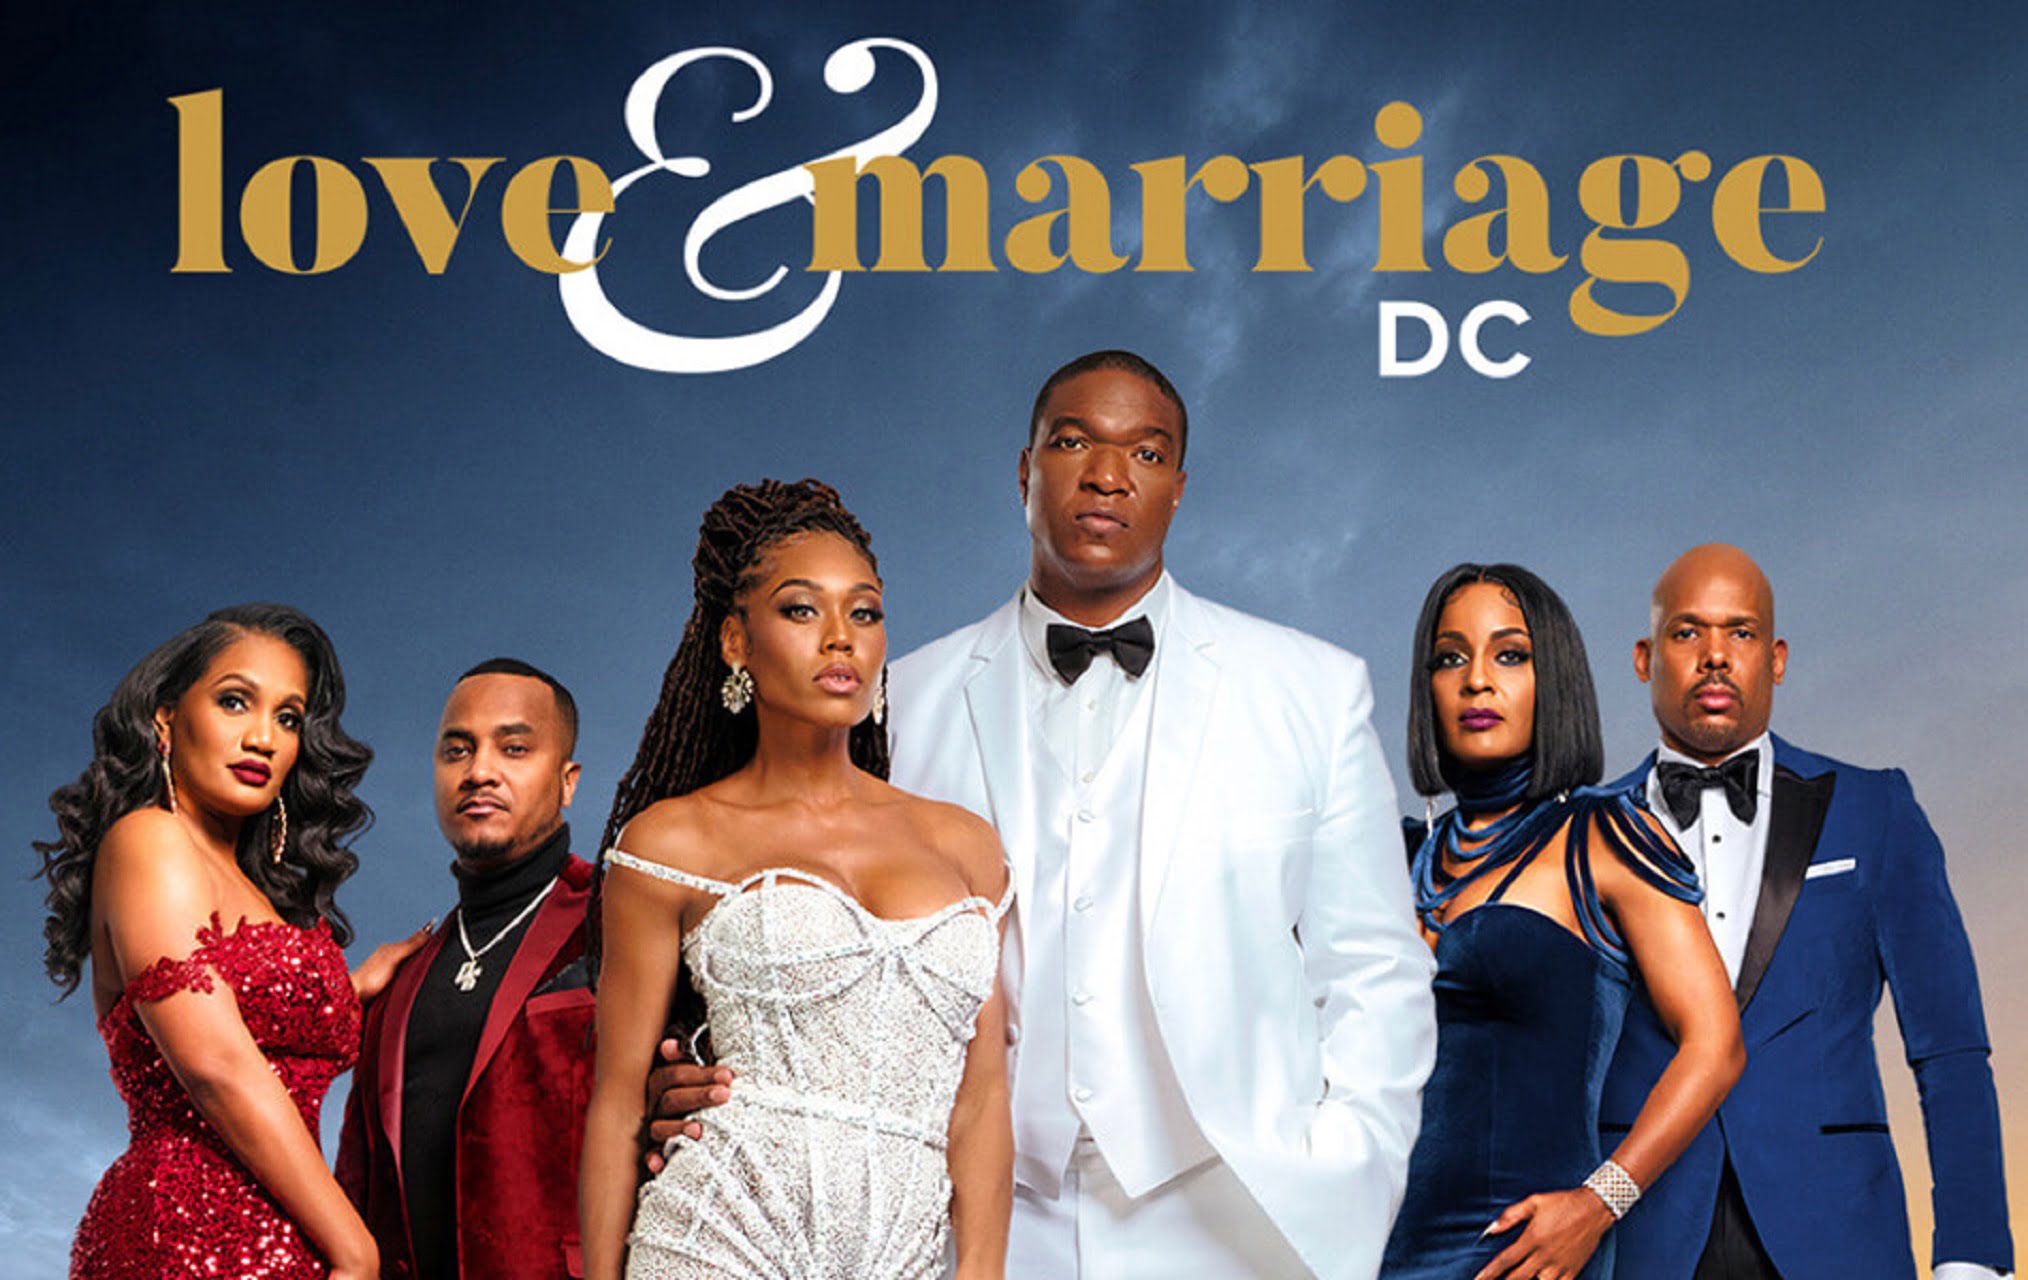 Watch Love & Marriage DC Online Free